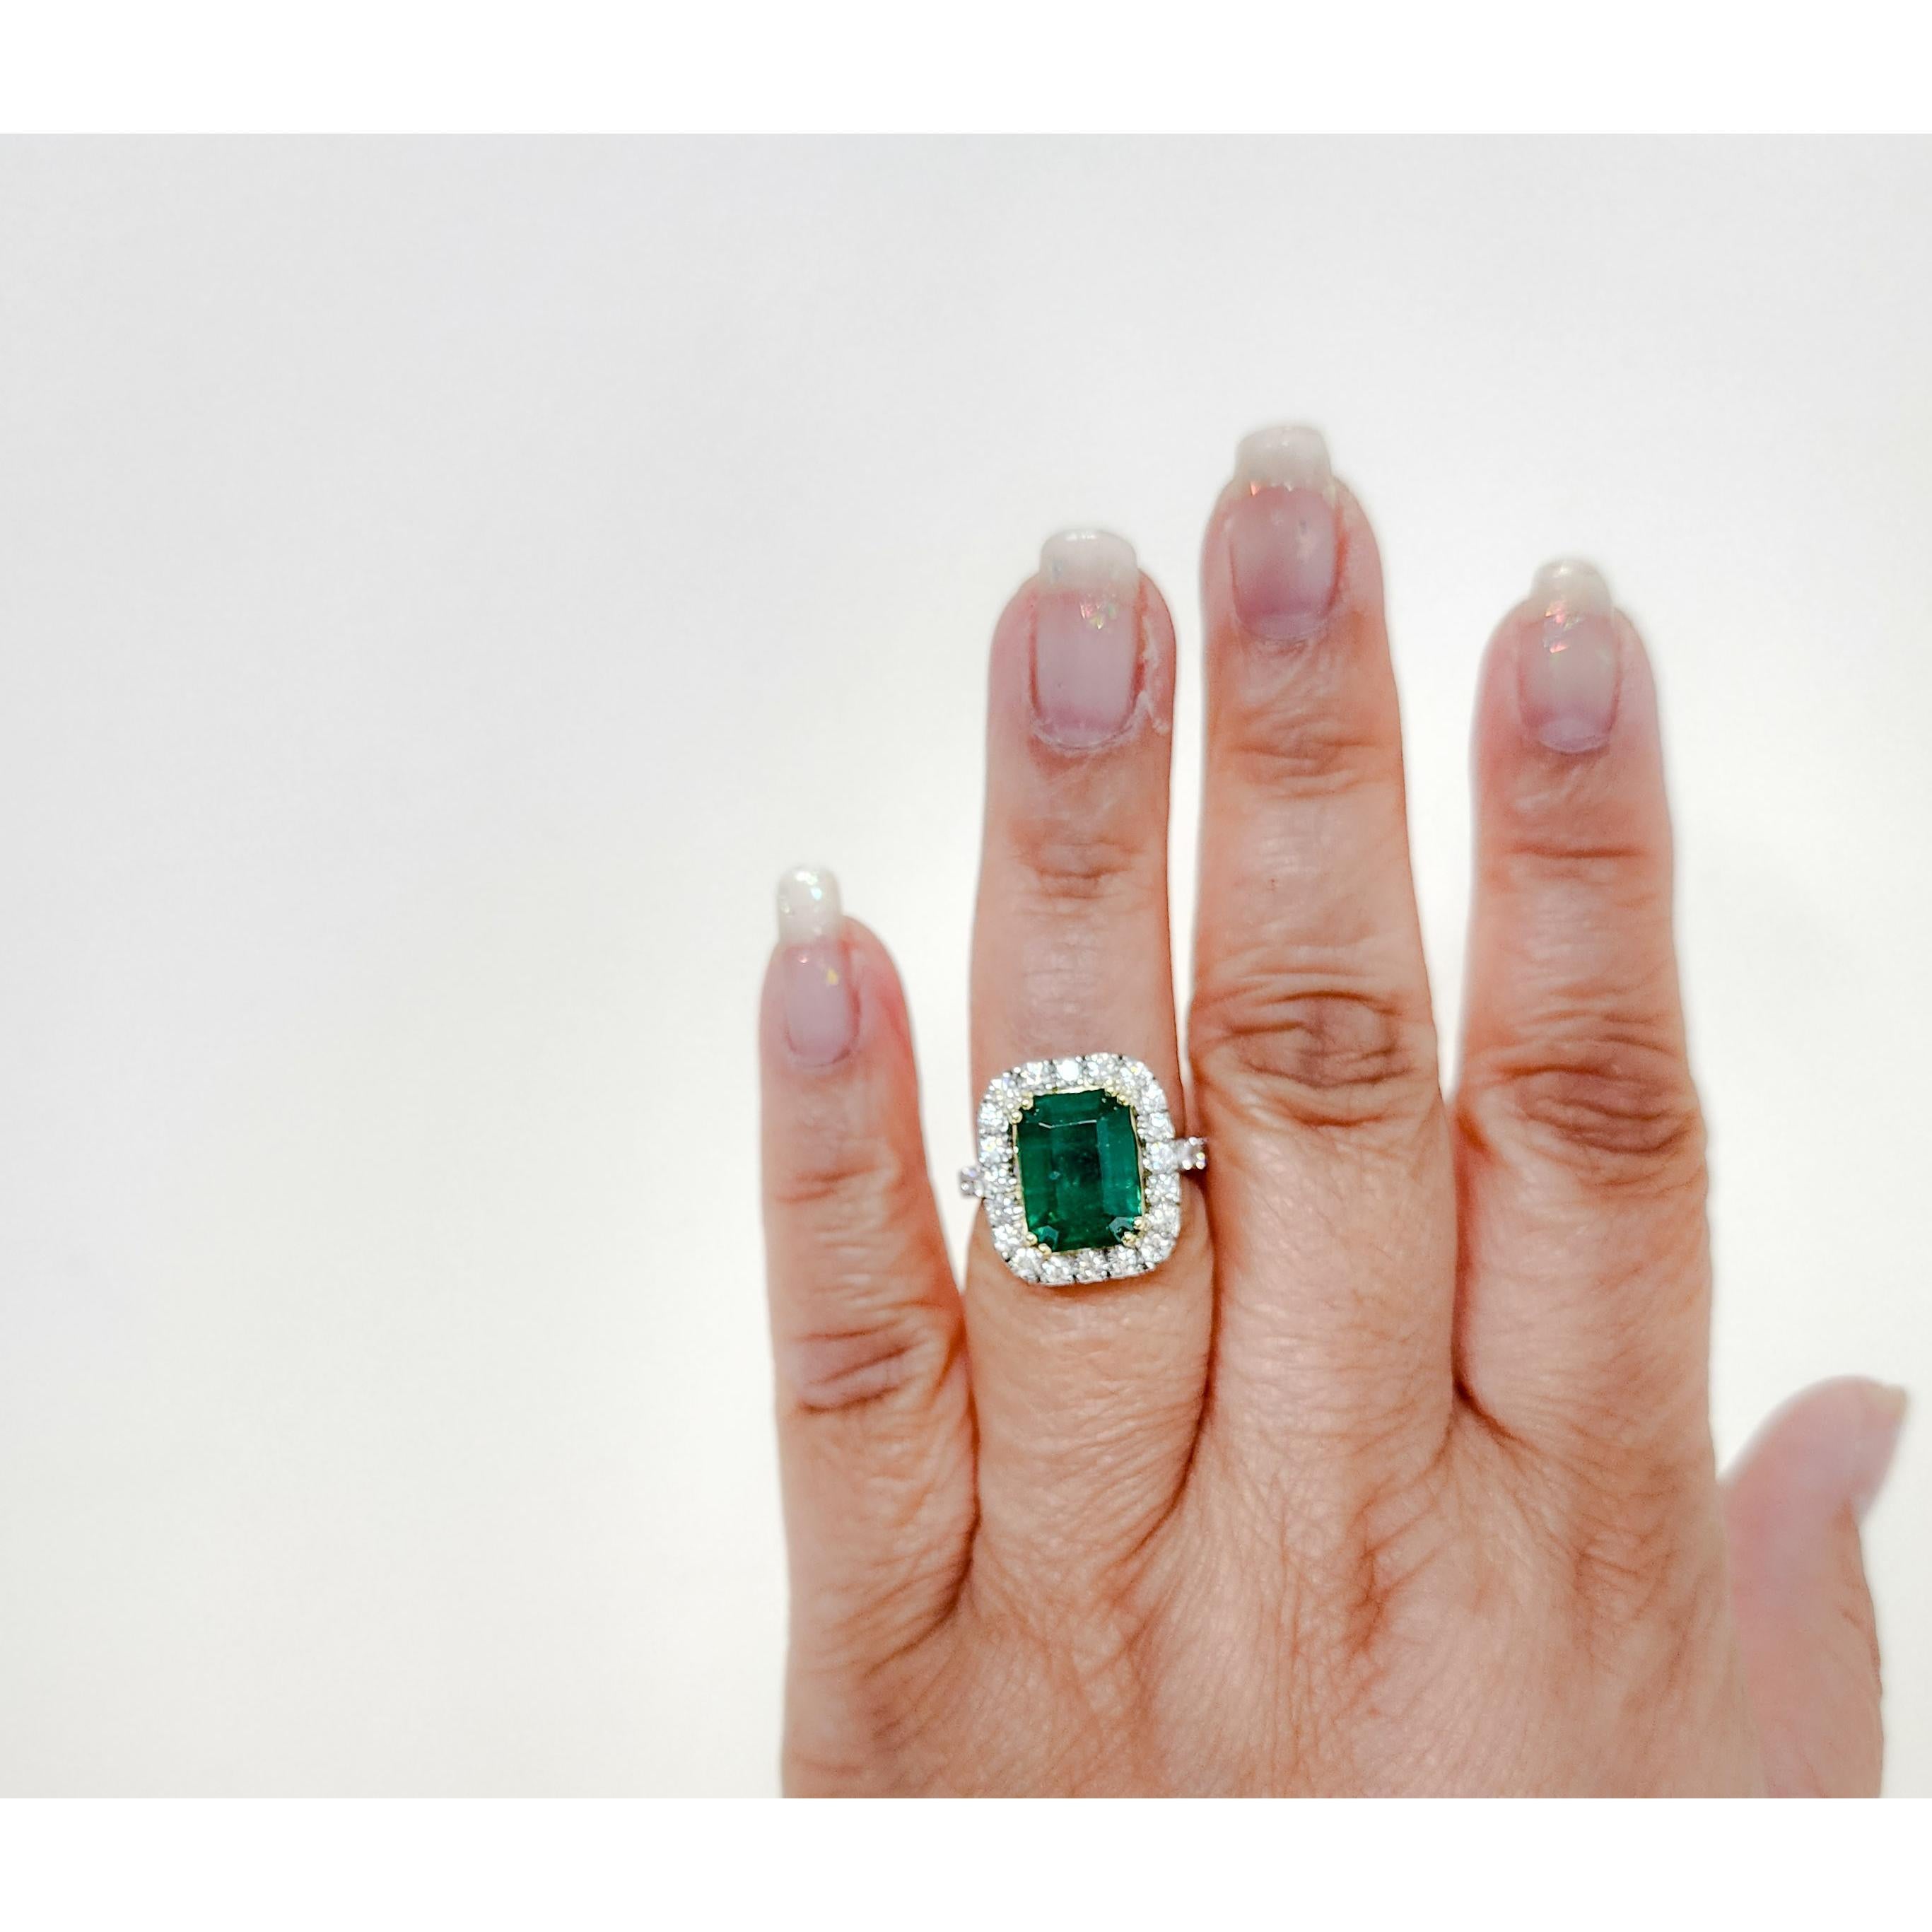 Beautiful 5.80 ct. emerald emerald cut with good quality white diamond rounds around the emerald and on the band.  Handmade in 18k yellow gold and platinum.  Ring size 6.75.